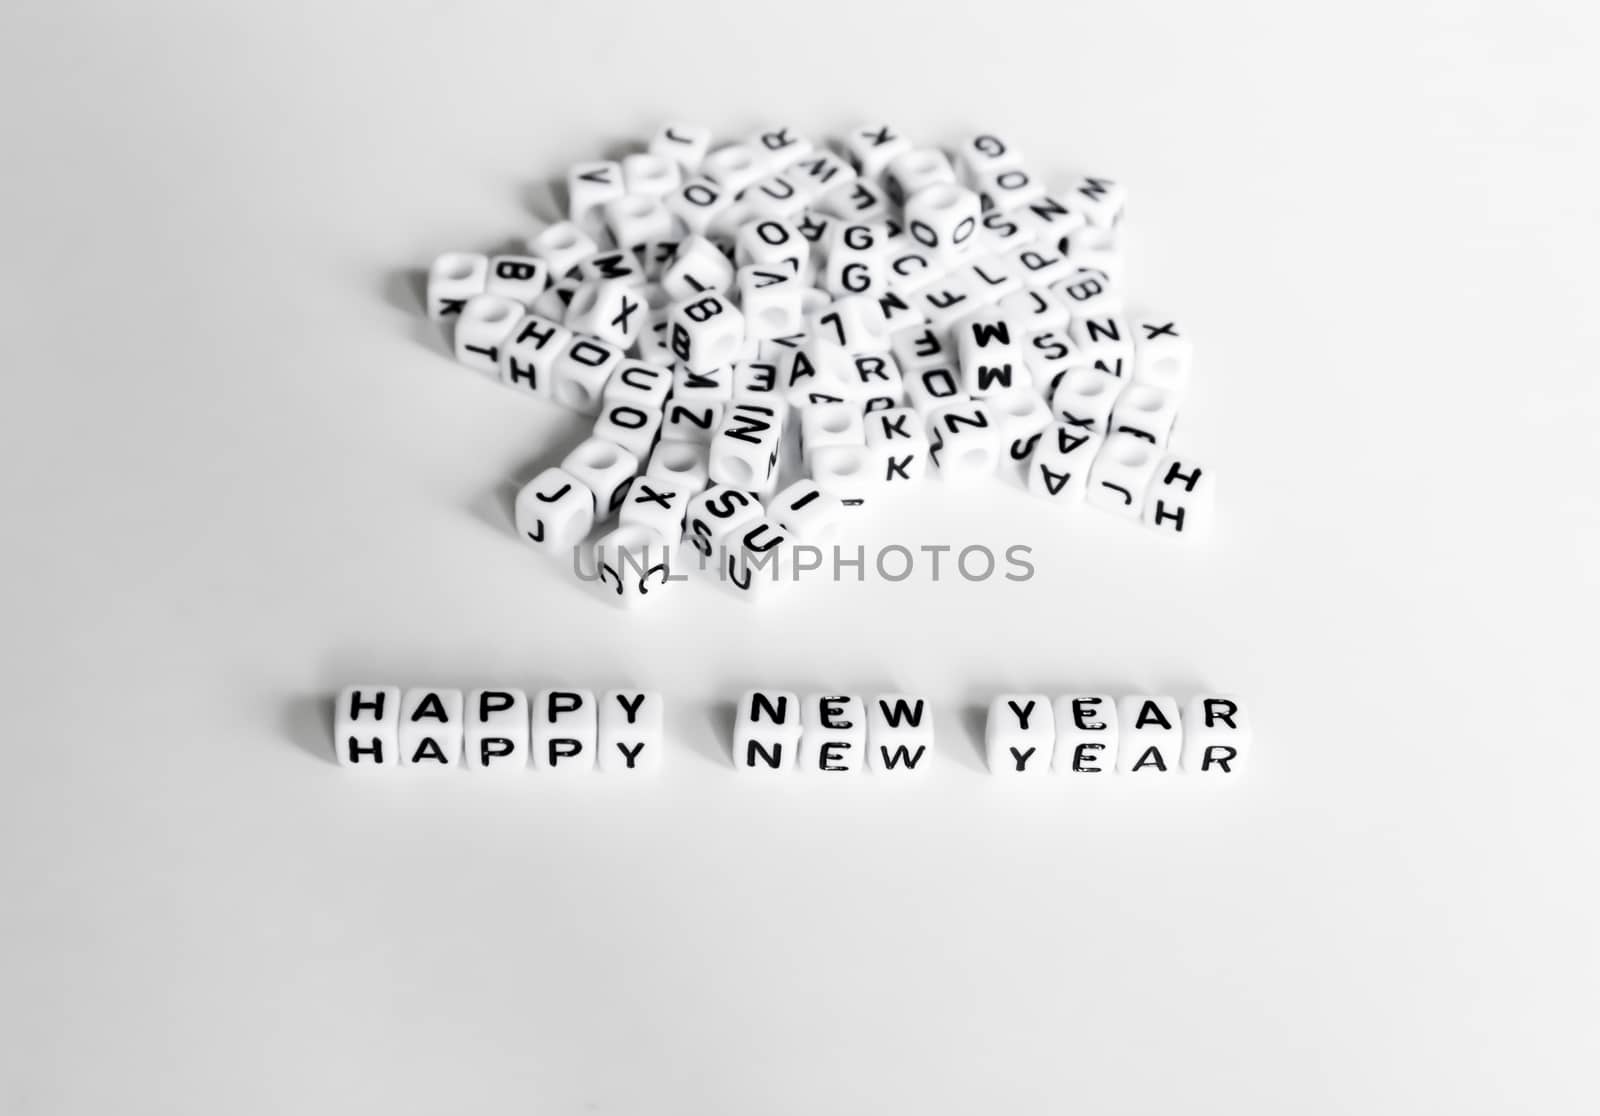 Happy New Year design element in black and white for calendar, greeting cards, sales stickers